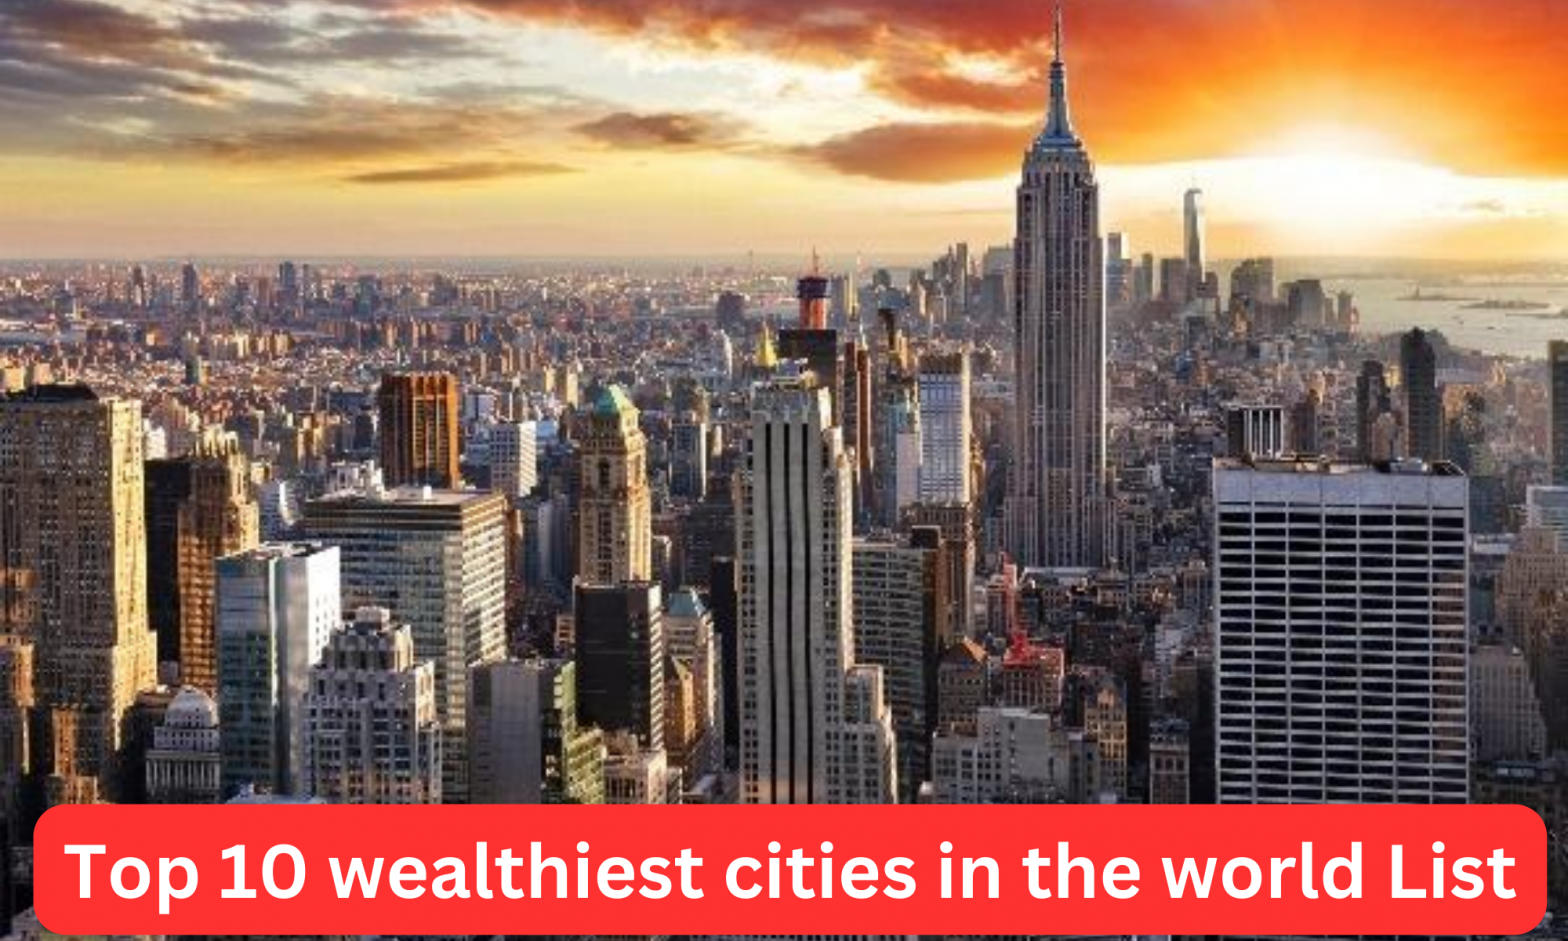 Top 10 wealthiest cities in the world List